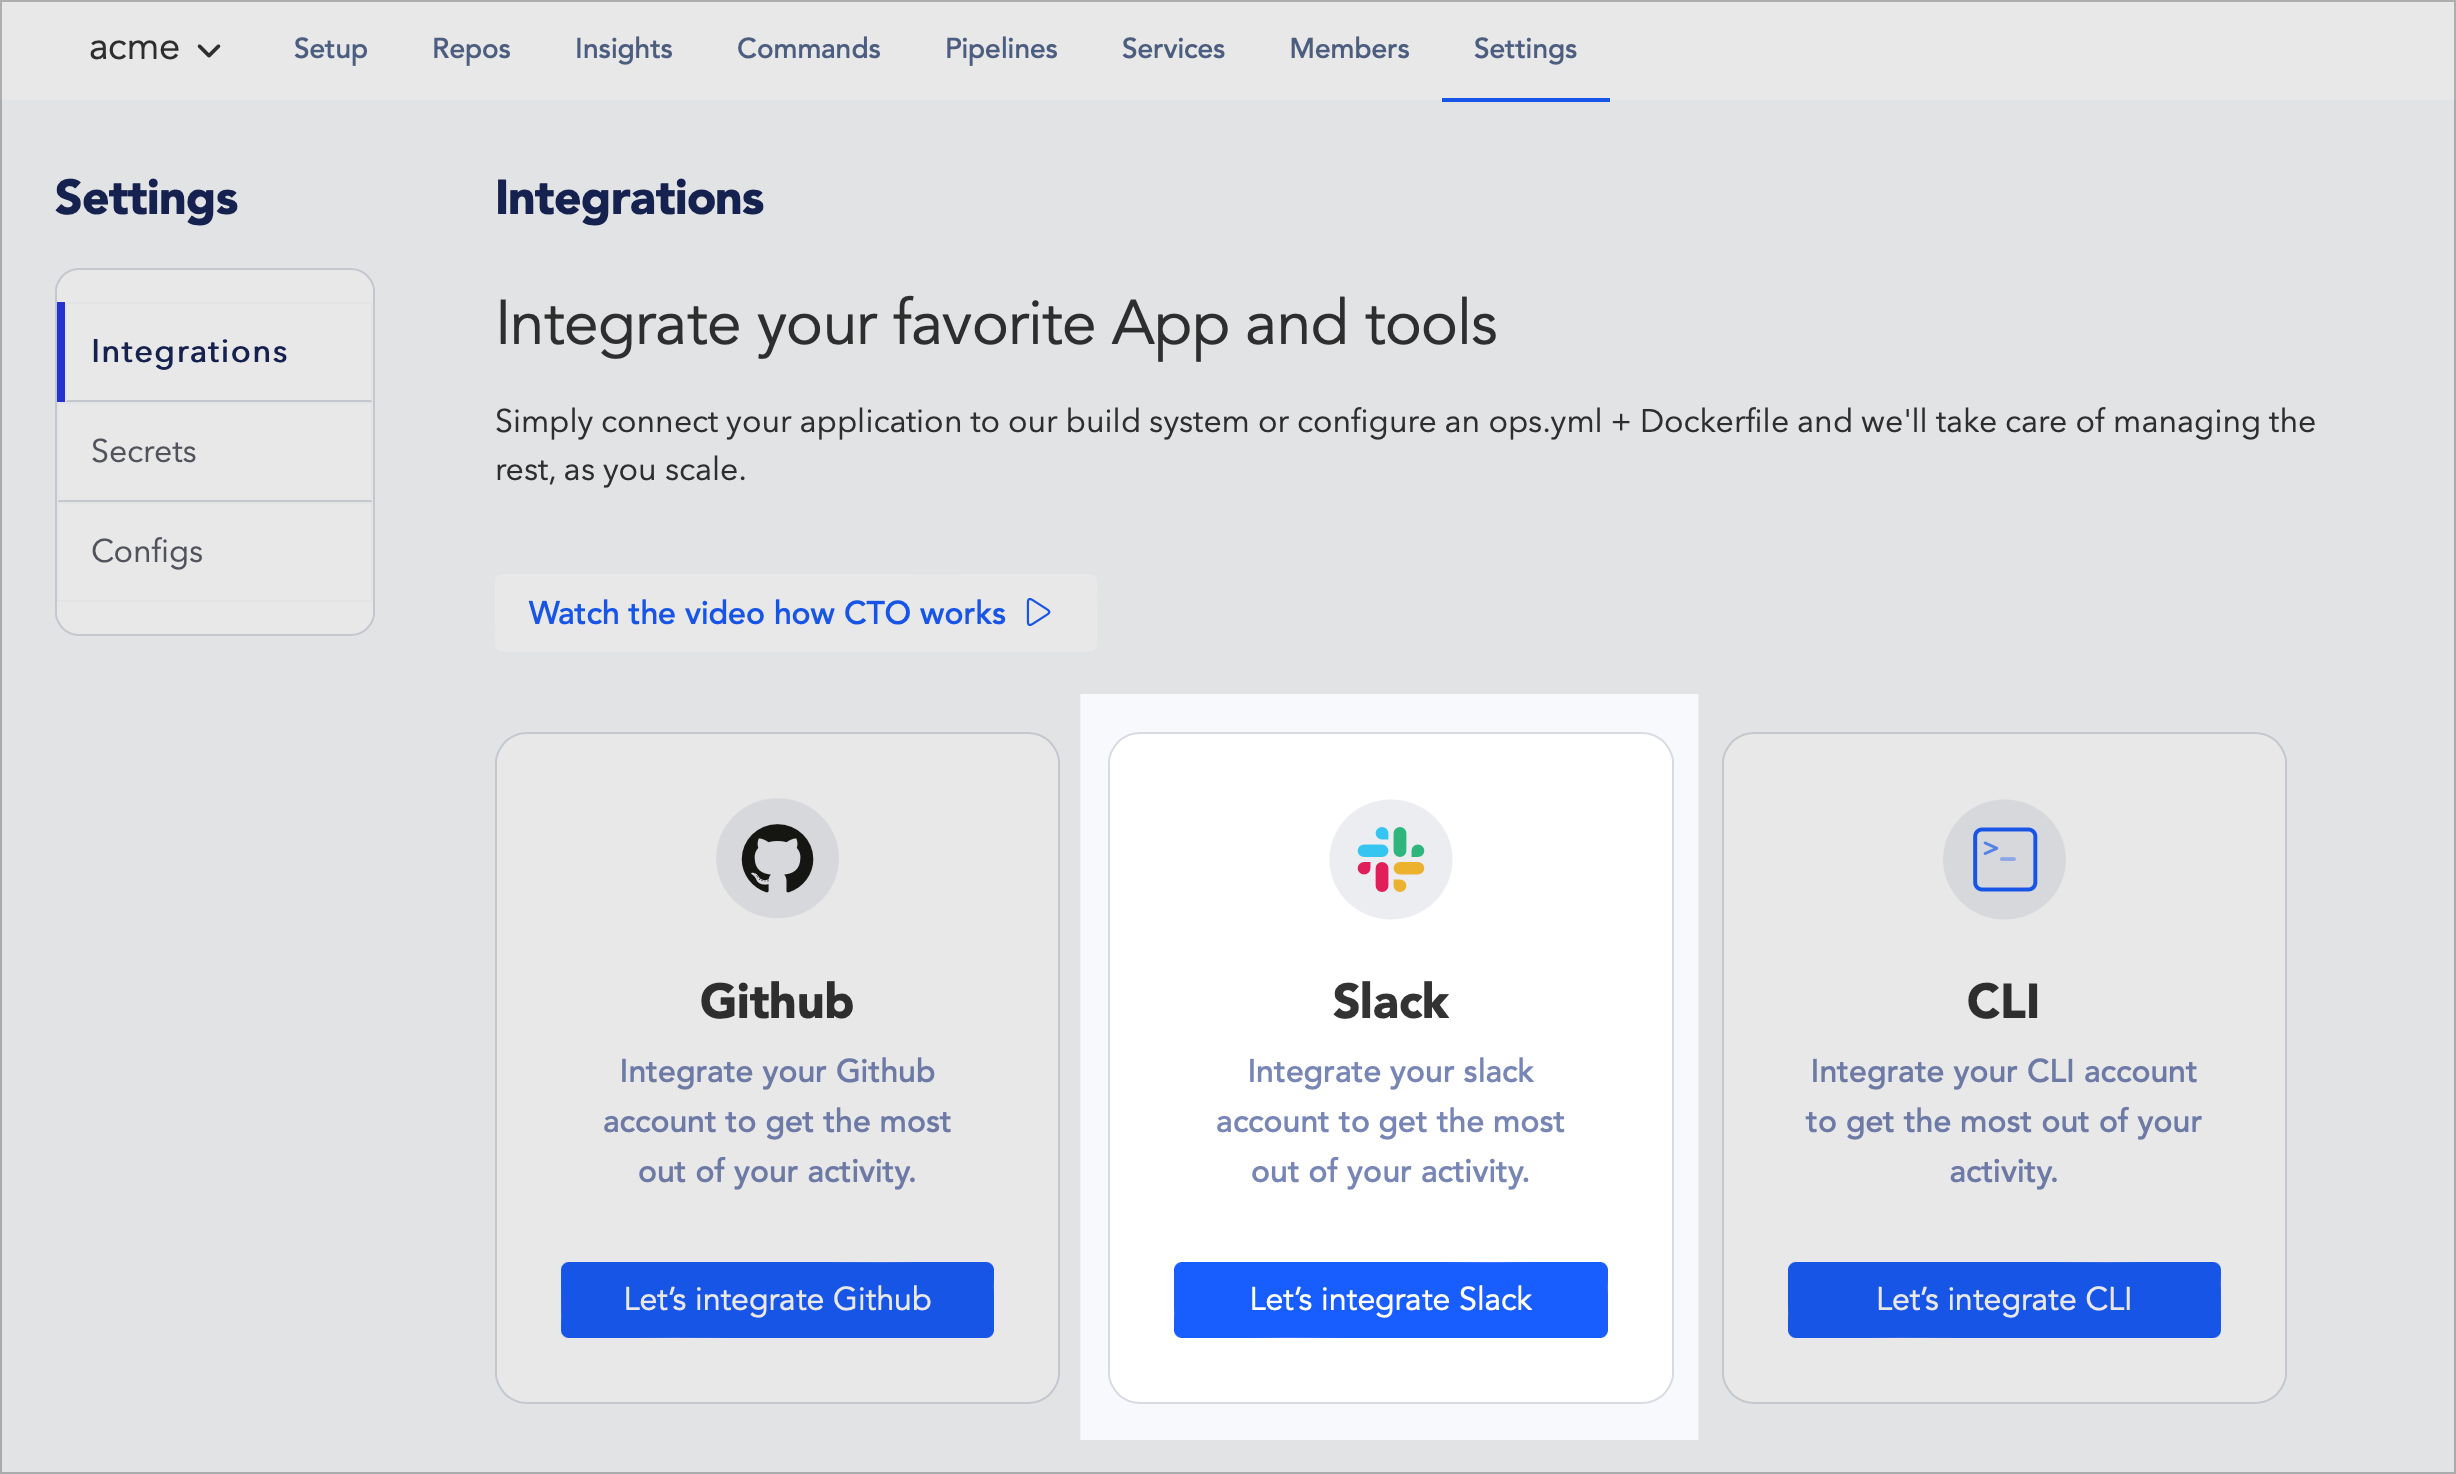 Click on "Let's Integrate Slack" from the Integrations tab of the Settings page.